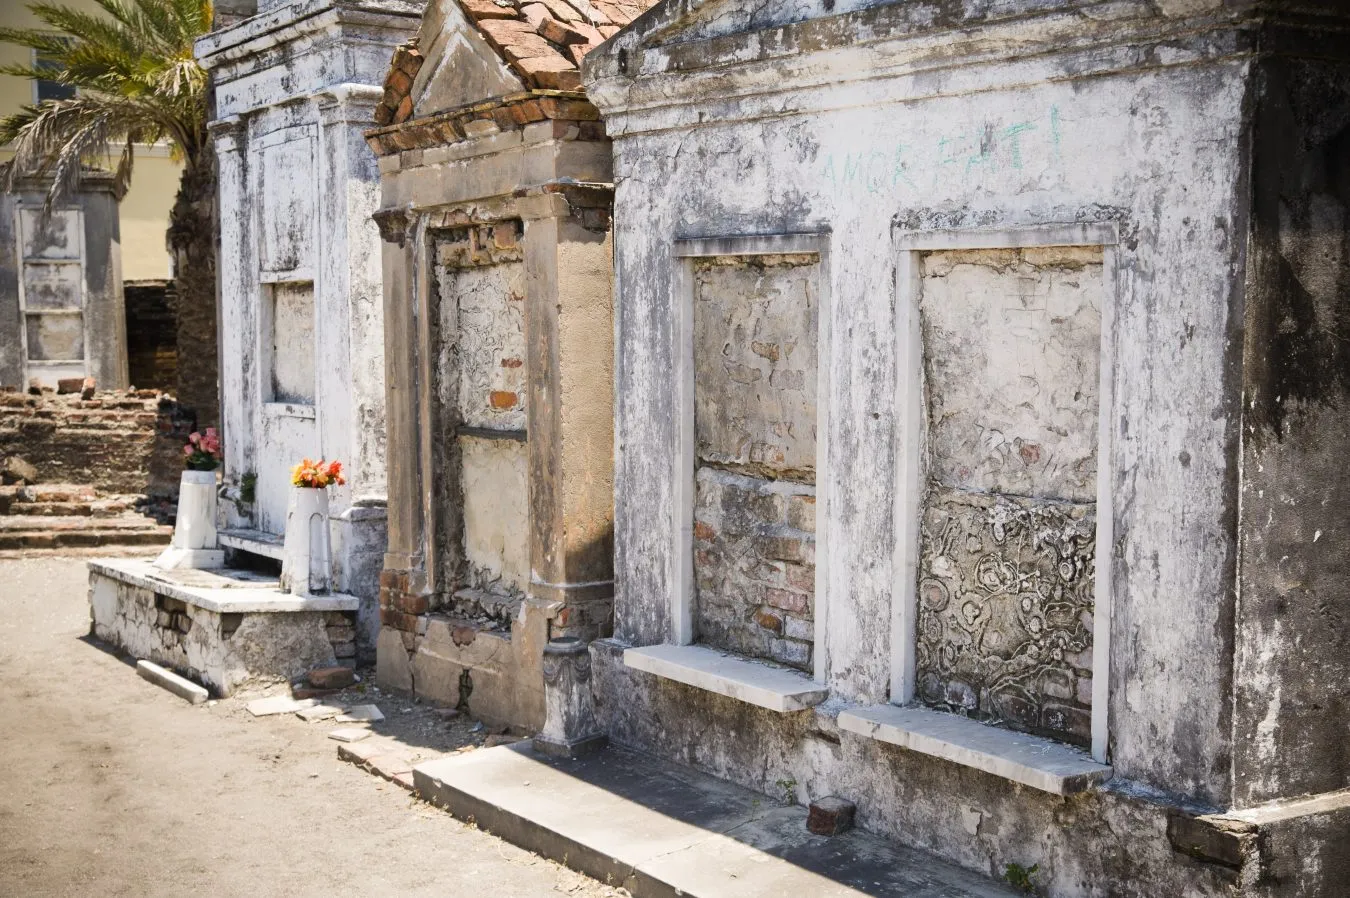 tombs inside st louis cemetery no 1, one of of the best new orleans weekend things to see